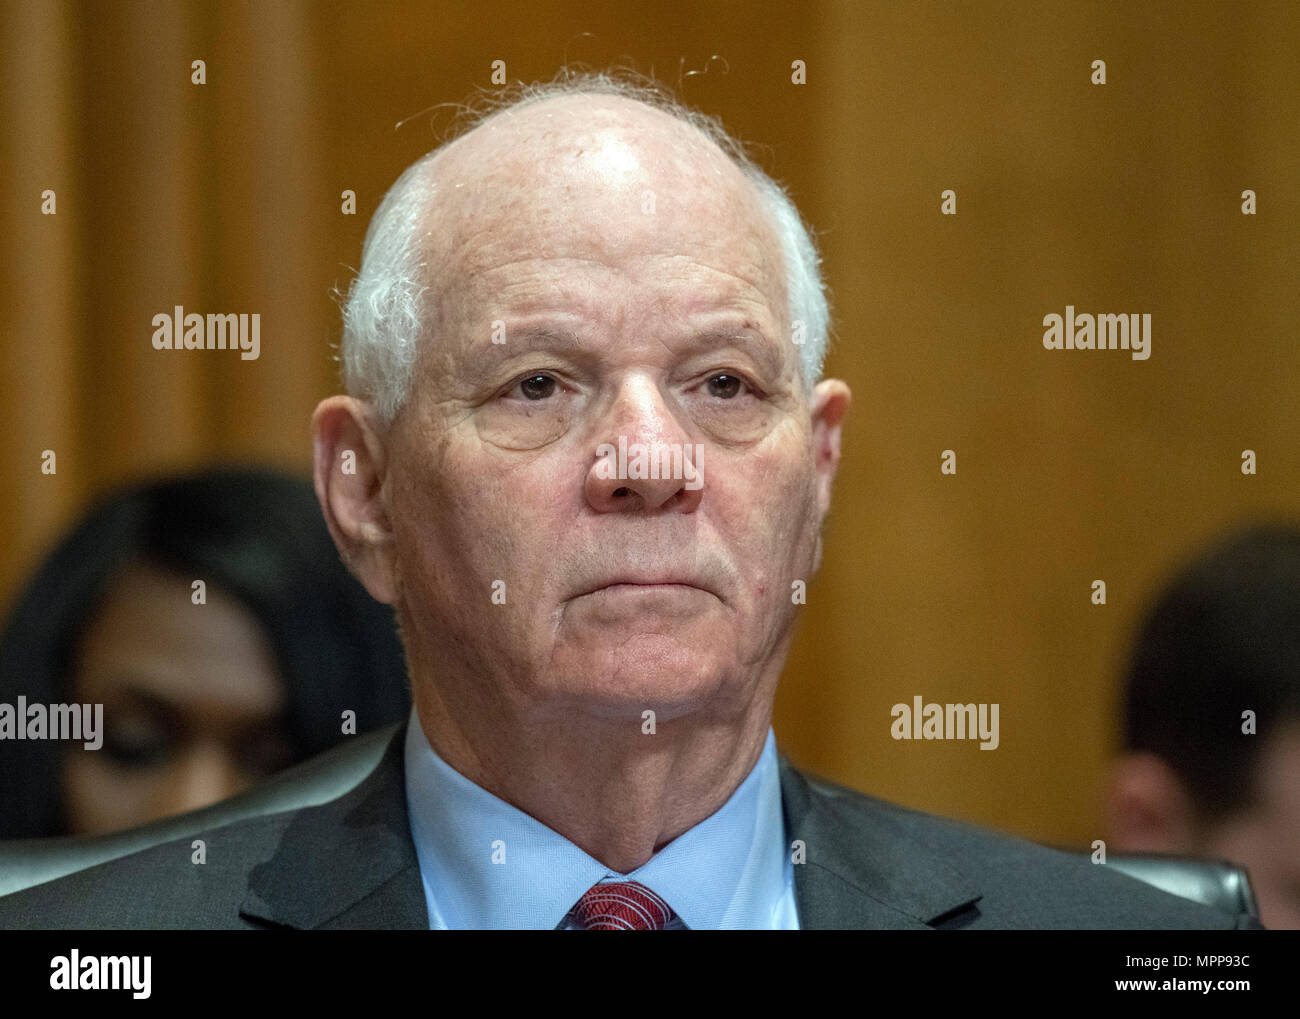 United States Senator Ben Cardin (Democrat of Maryland) listens as US Secretary of State Mike Pompeo appears before the to 'Review the FY 2019 State Department budget request' on Capitol Hill in Washington, DC on Thursday, May 24, 2018. Prior to delivering his prepared remarks, Secretary Pompeo read a letter from US President Donald J. Trump to North Korean leader Kim Jong-un cancelling their planned summit in Singapore on June 12, 2018 Credit: Ron Sachs/CNP /MediaPunch Stock Photo